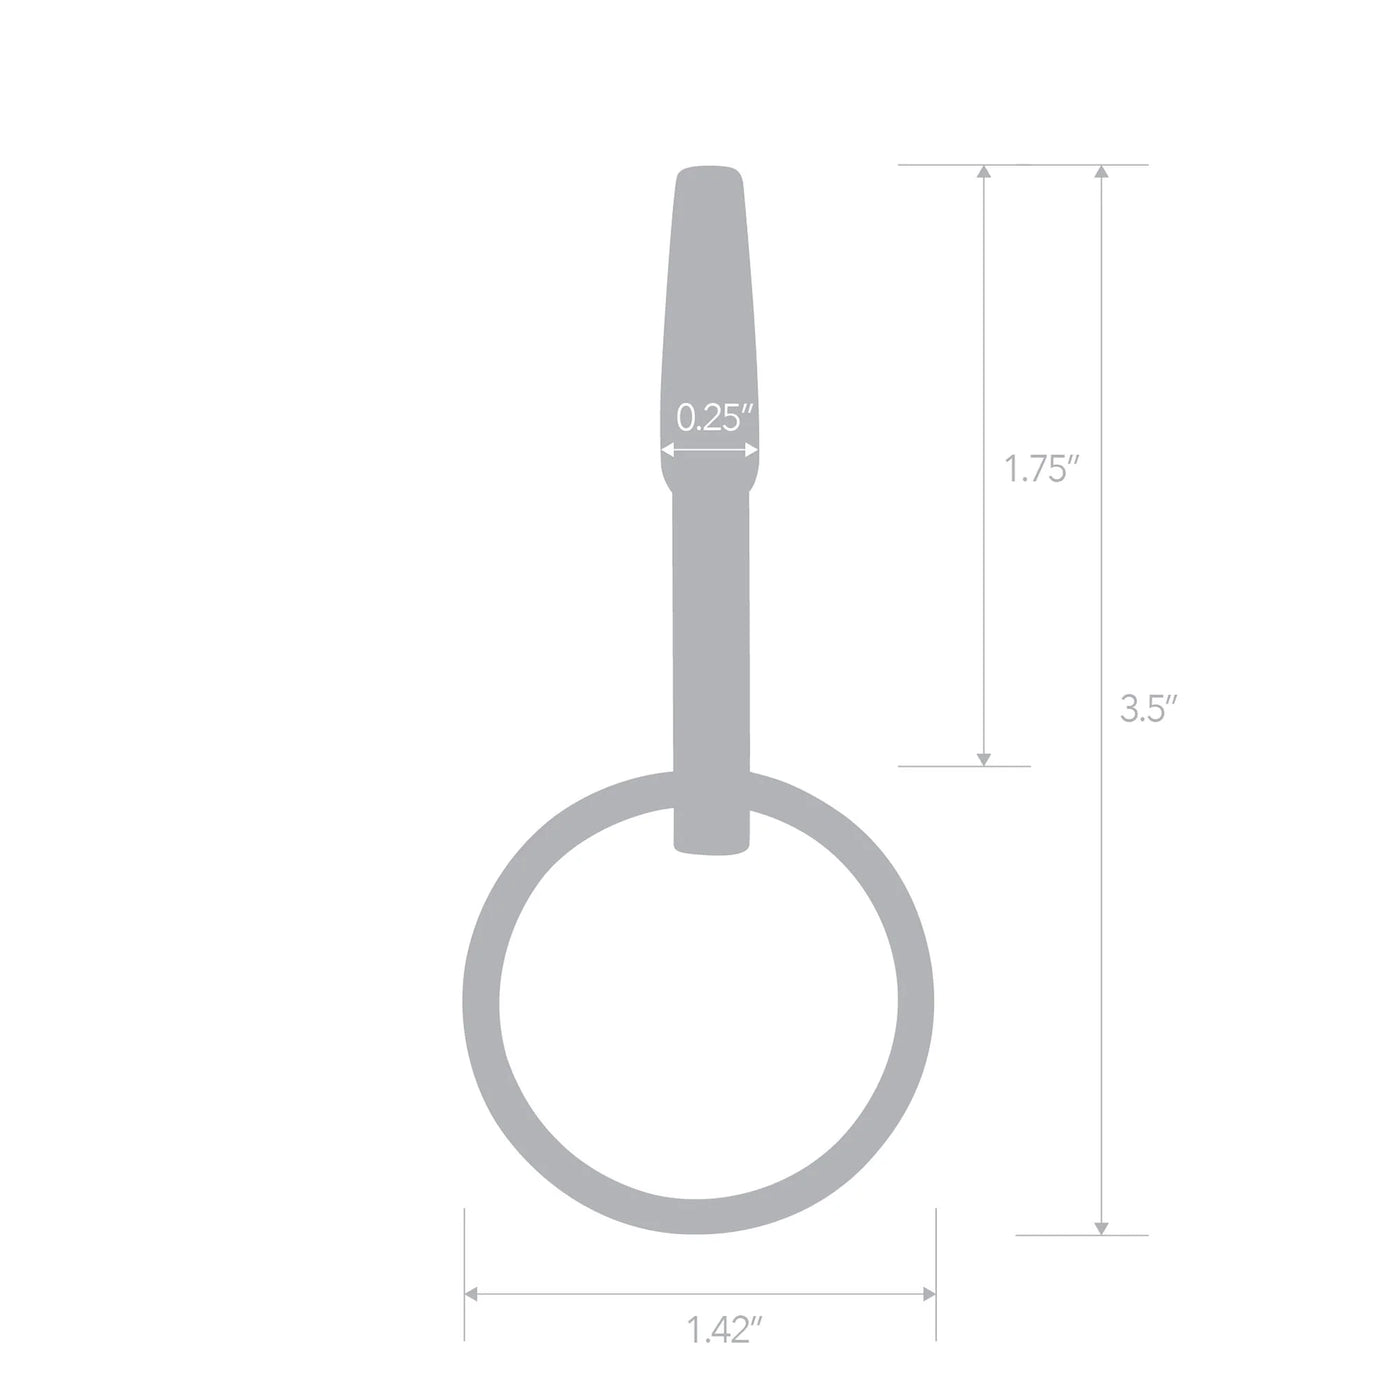 Blueline Hollow Penis Plug with Ring Urethral Probe, Stainless Steel - Hamilton Park Electronics